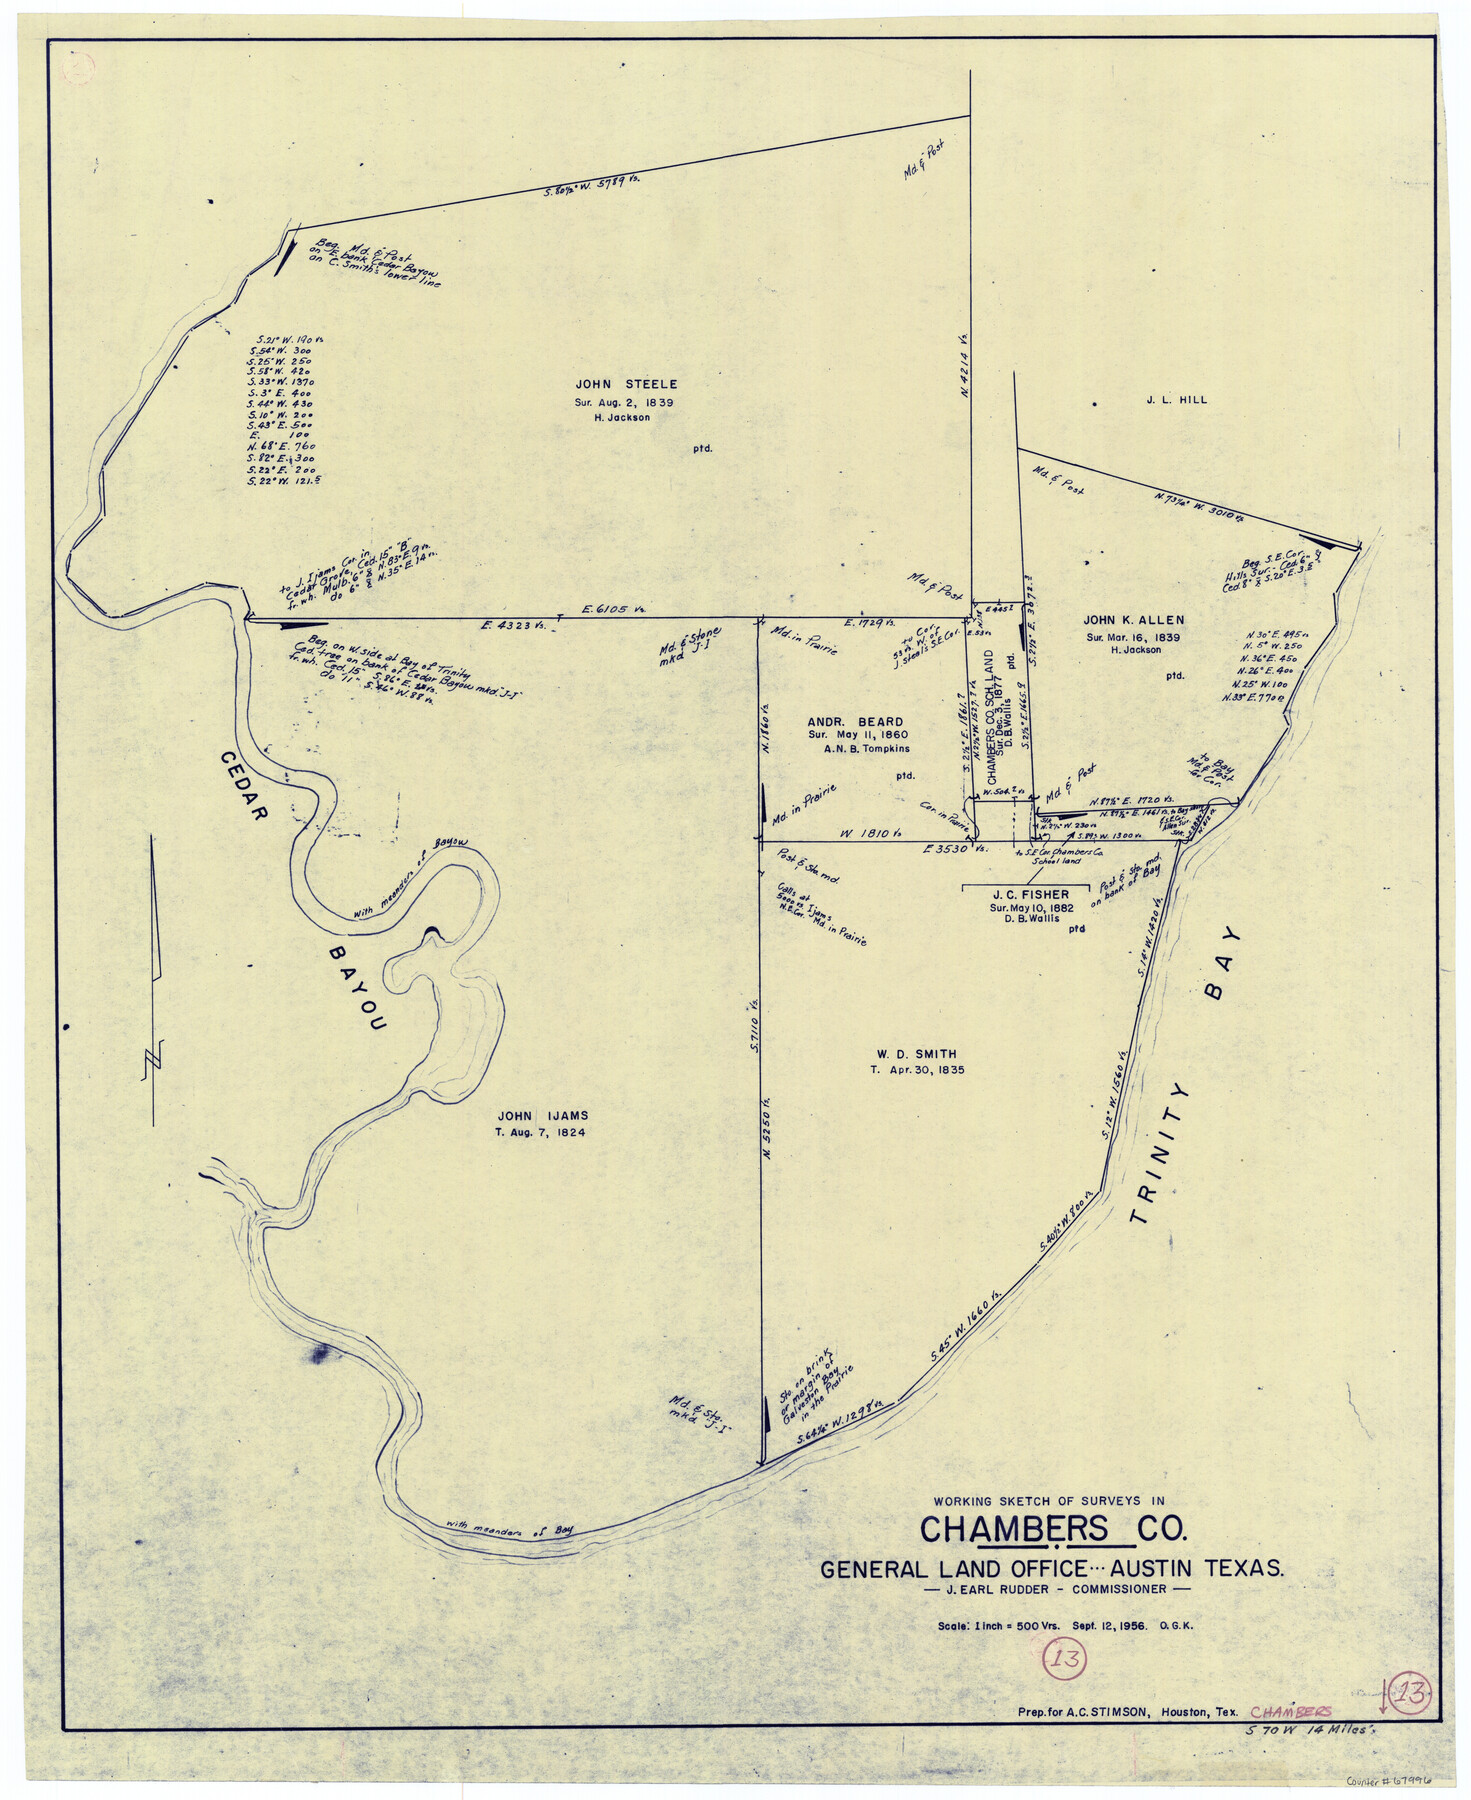 67996, Chambers County Working Sketch 13, General Map Collection